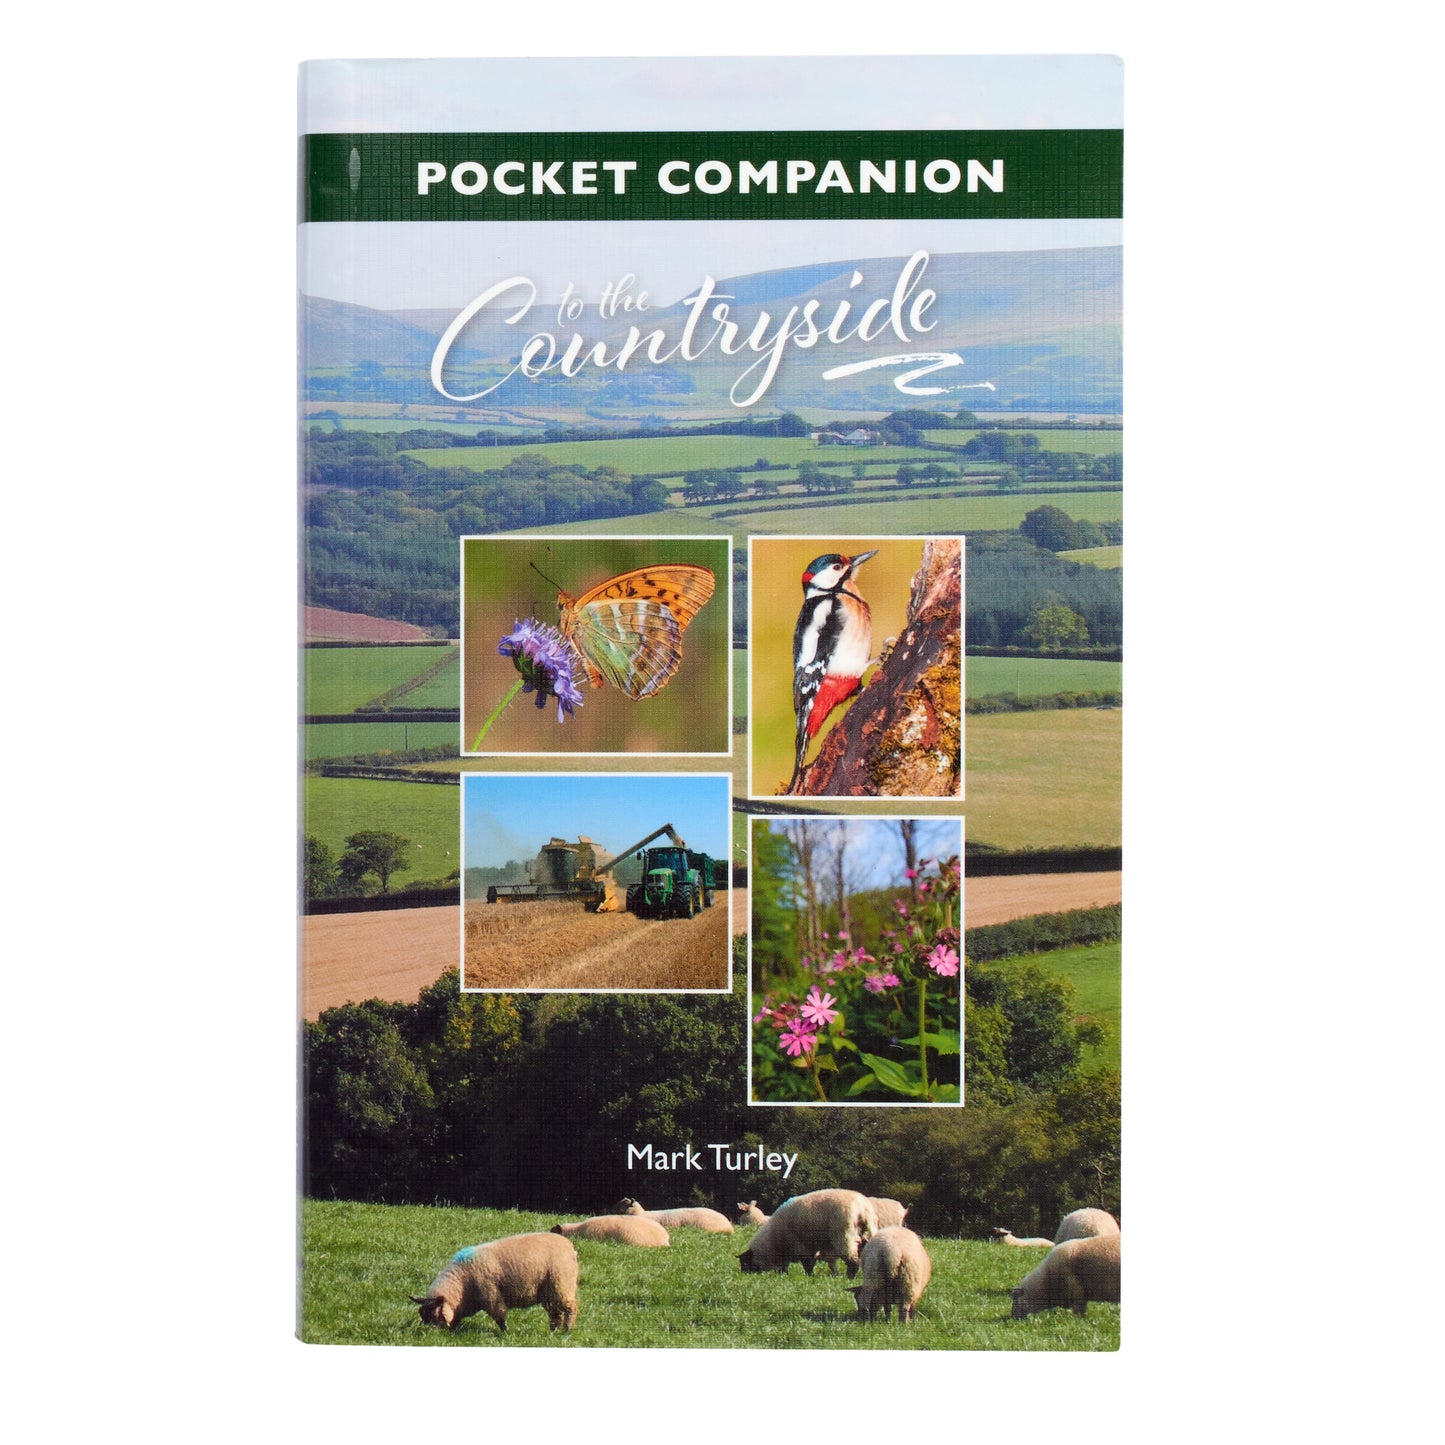 Pocket Companion to the Countryside